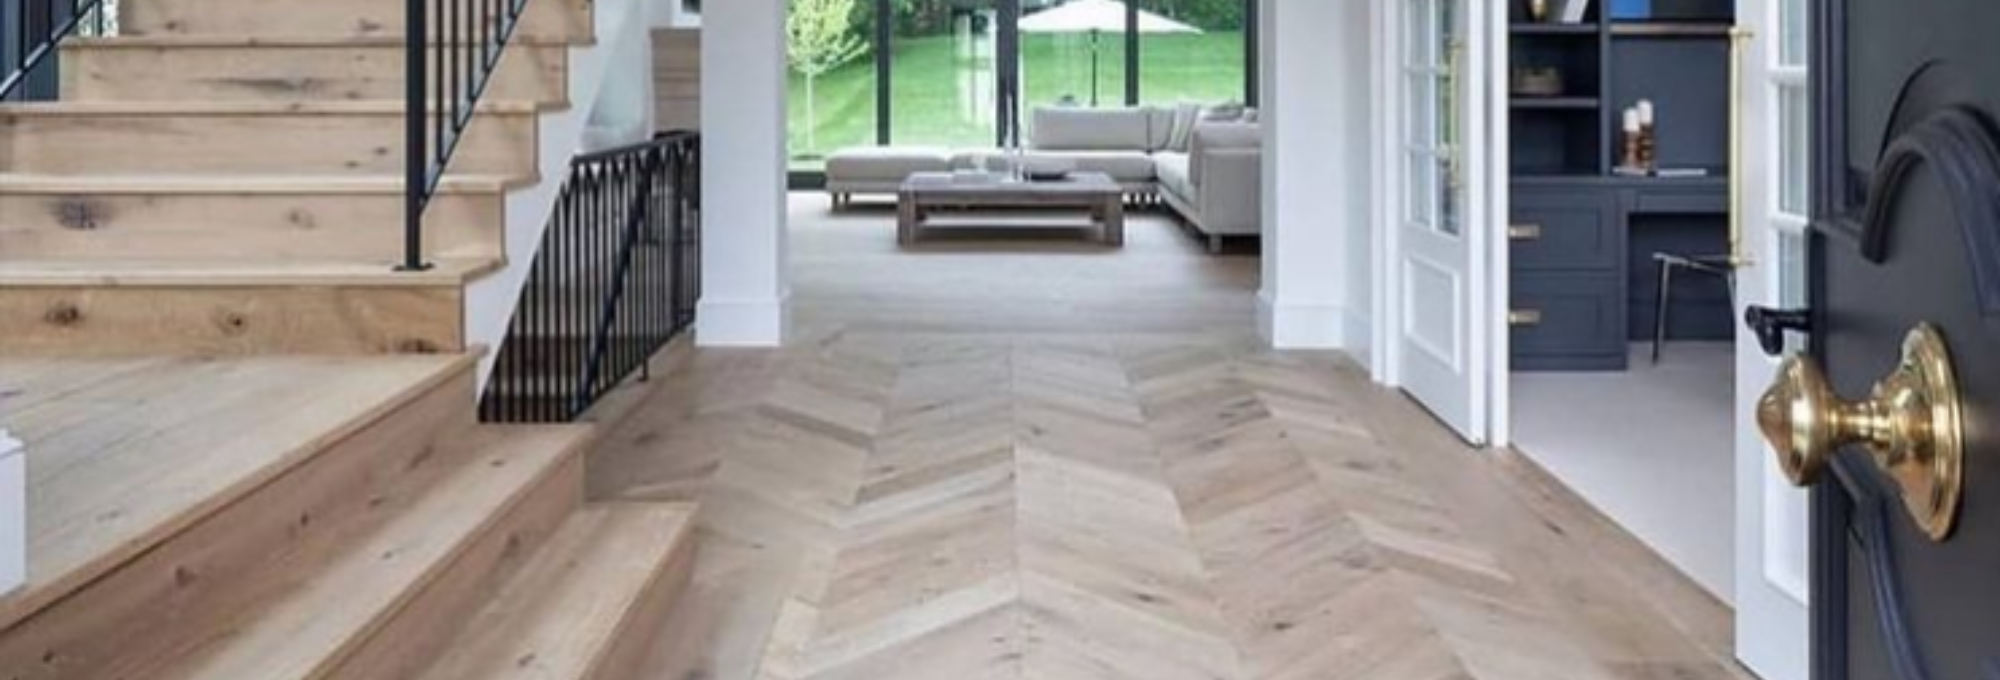 Flooring Advice from experts in Las Vegas